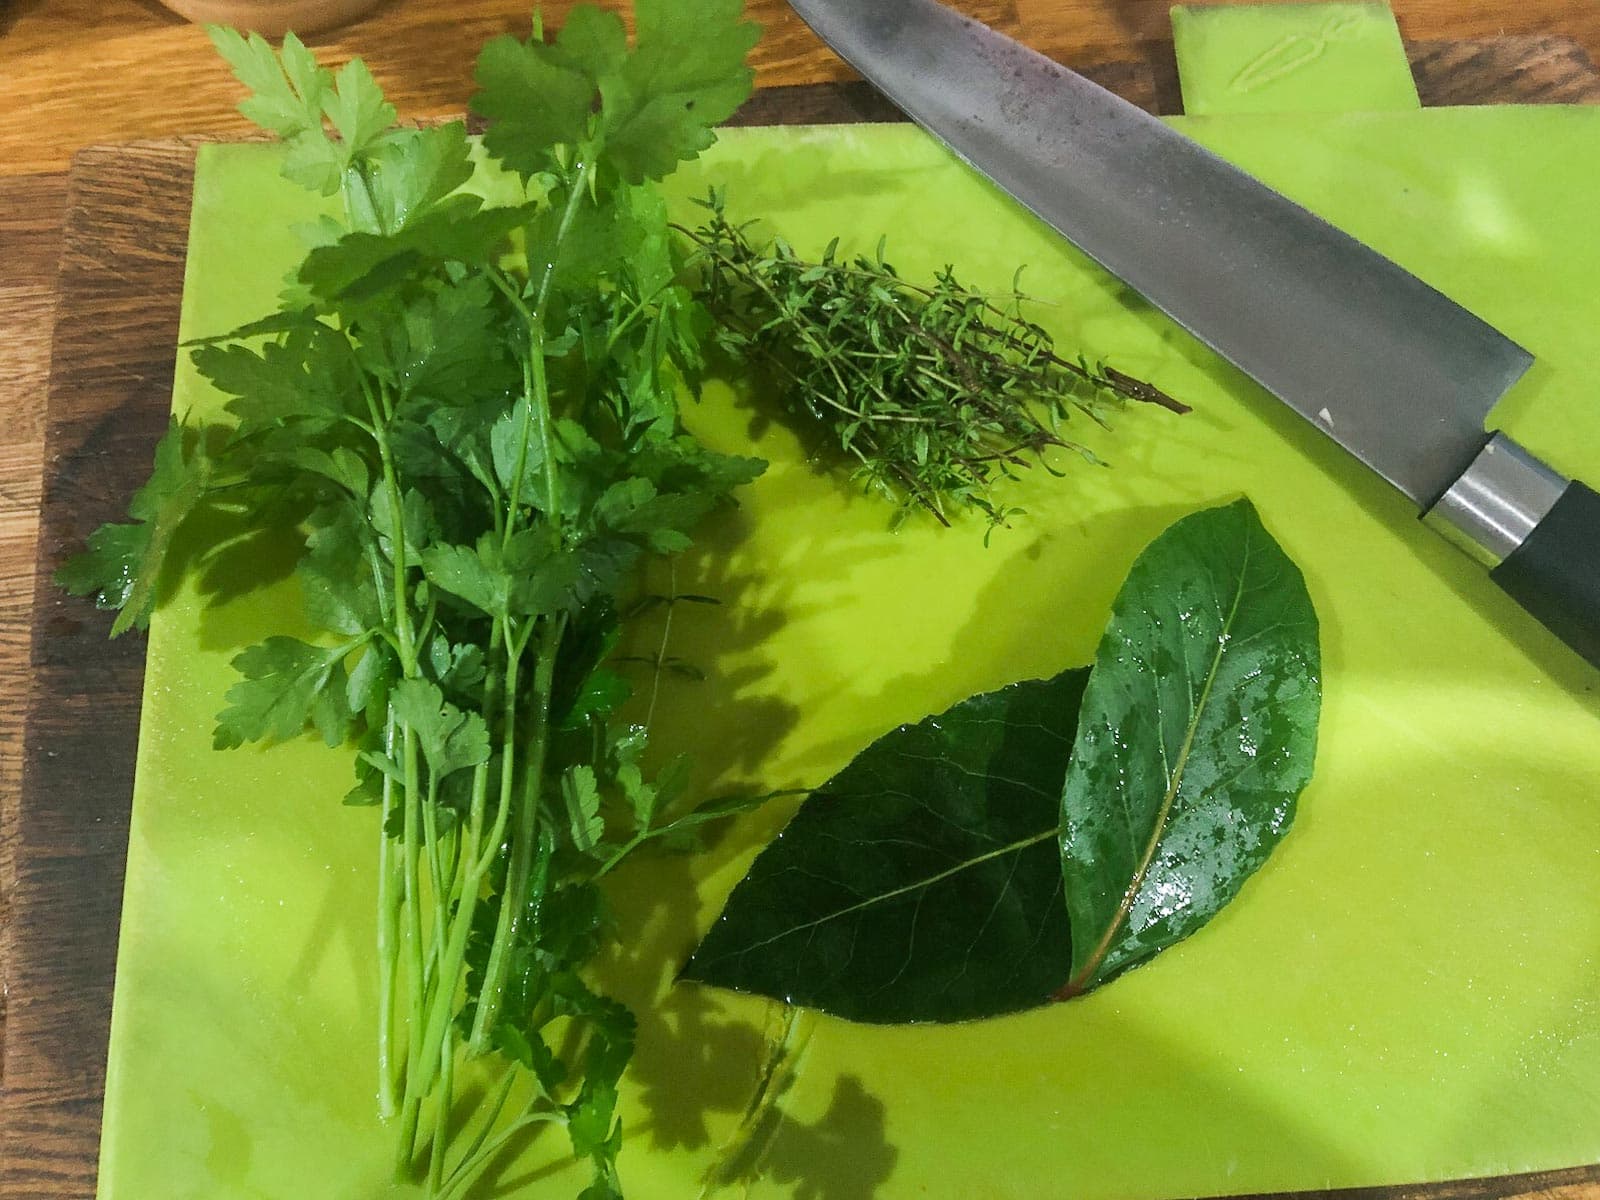 A green chopping board with a bunch of parsley, thyme and bay leaves freshly washed from the garden.